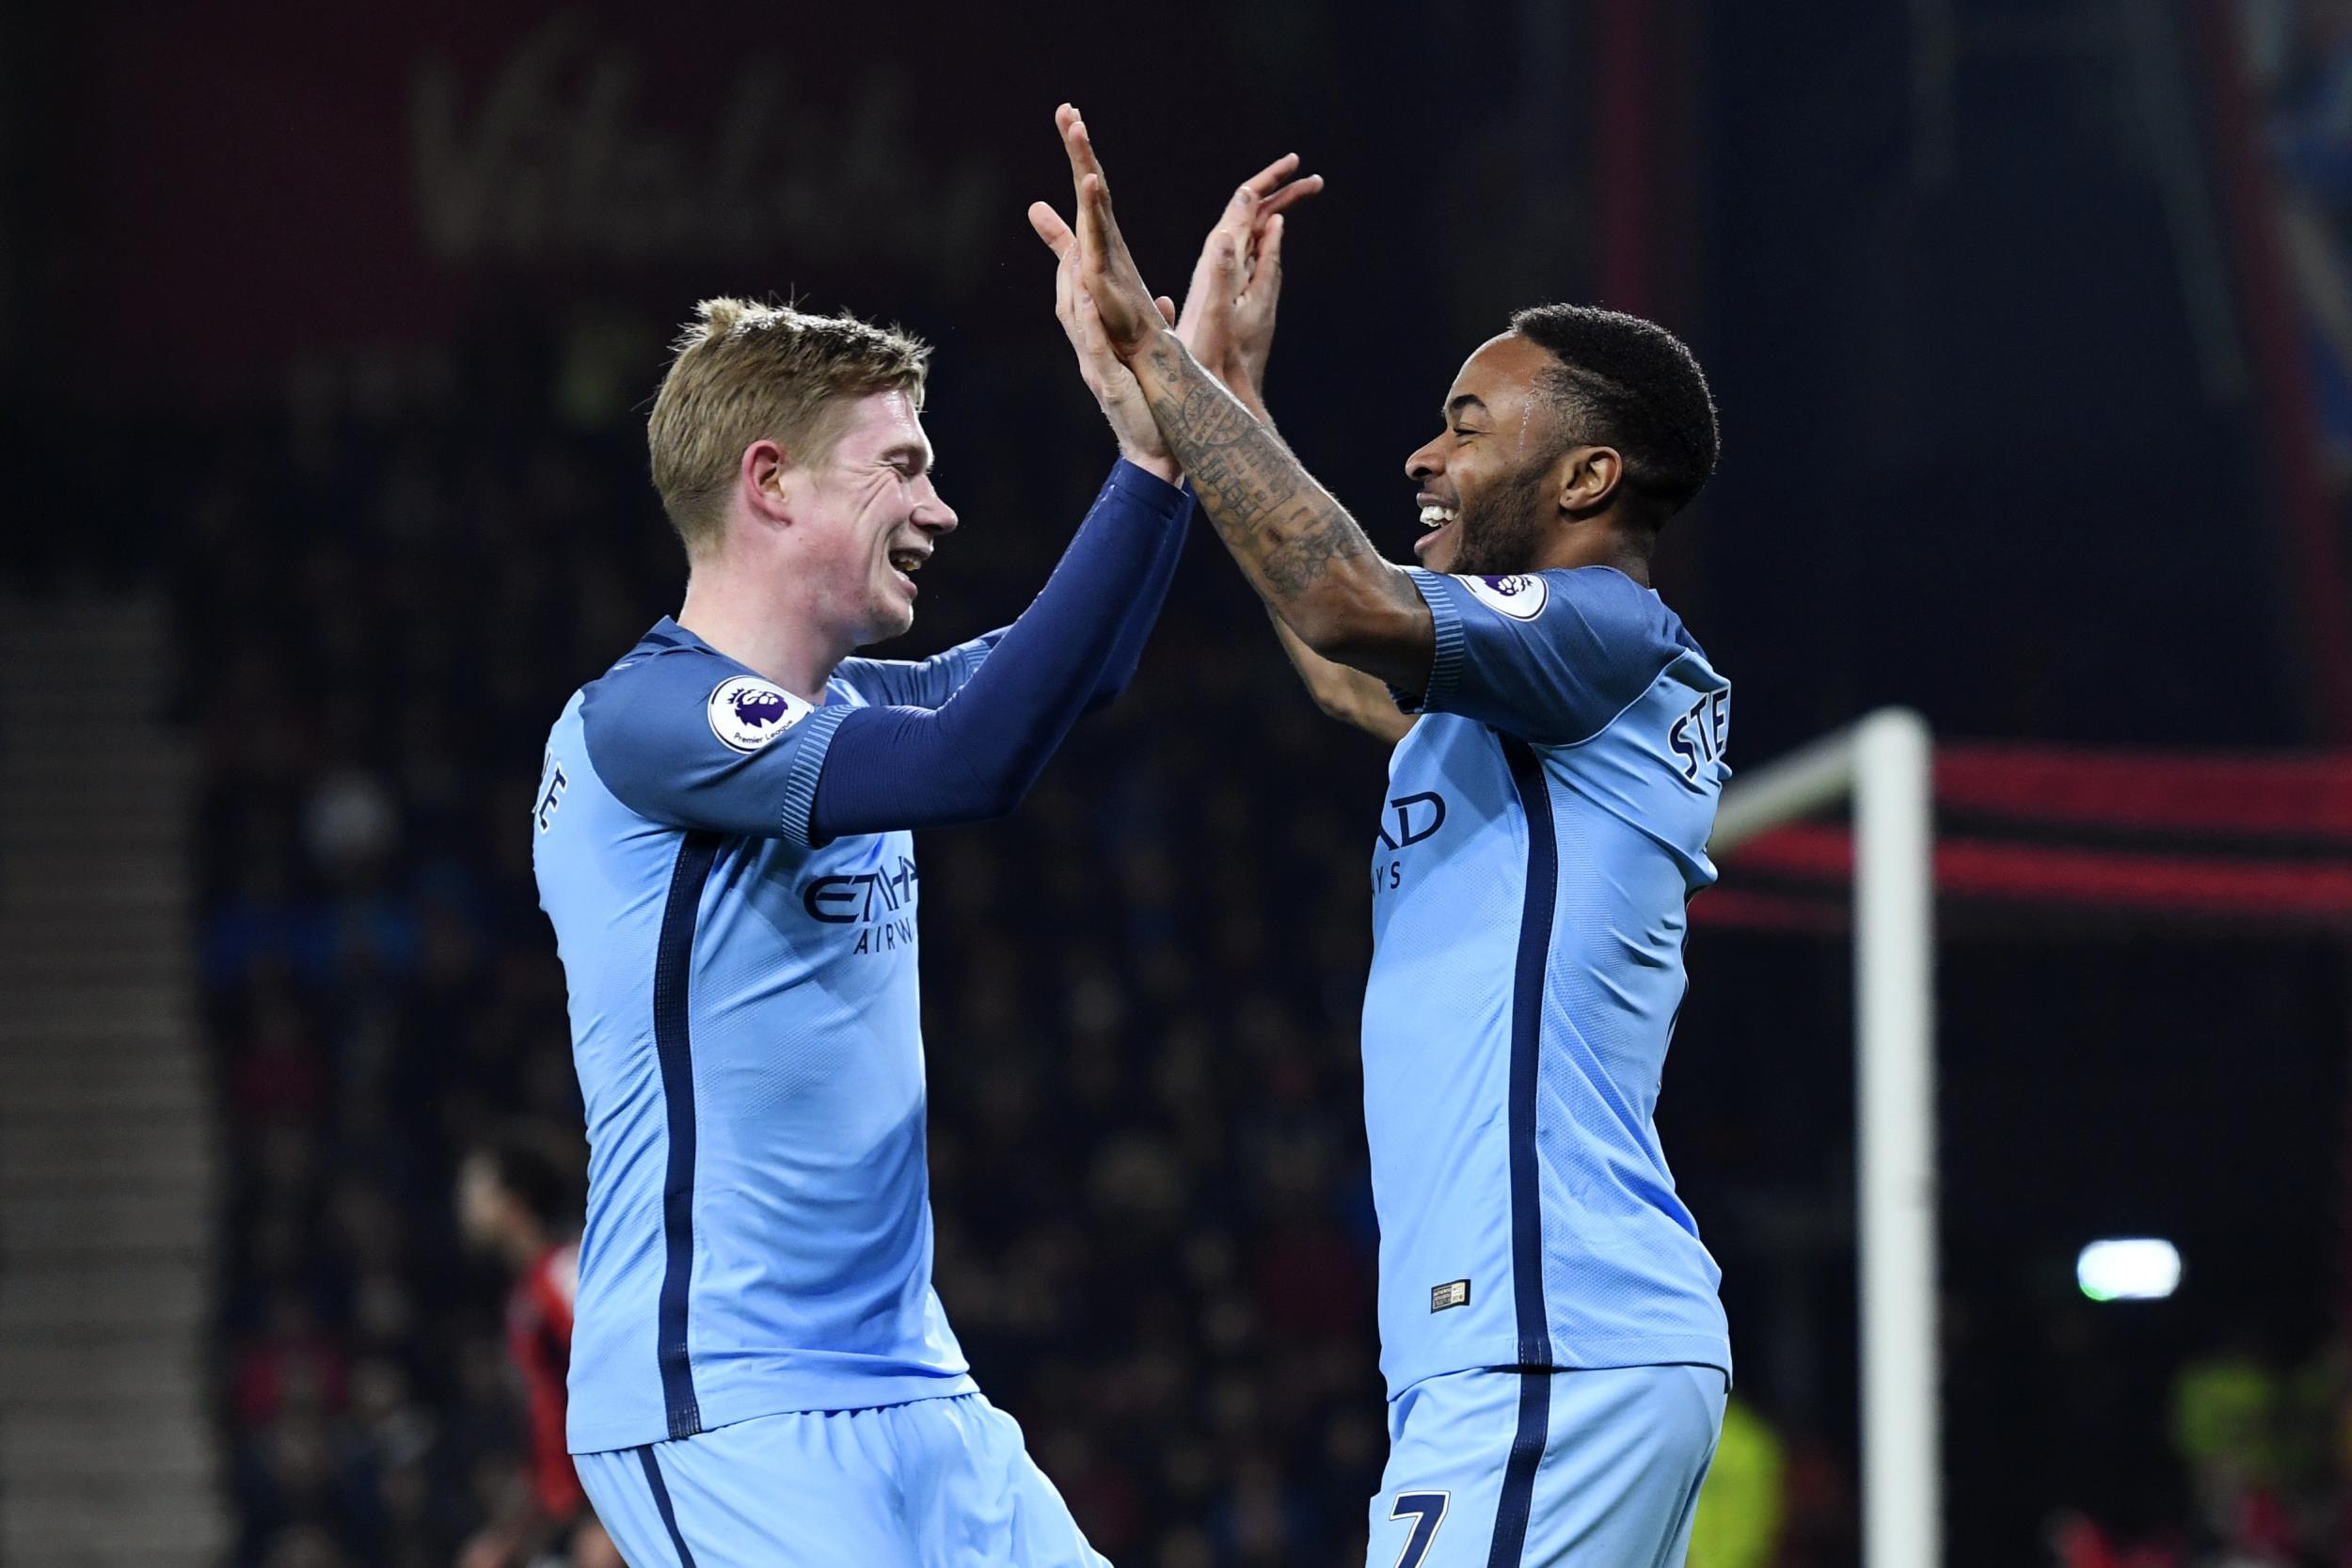 Sterling celebrates his goal with team-mate Kevin de Bruyne